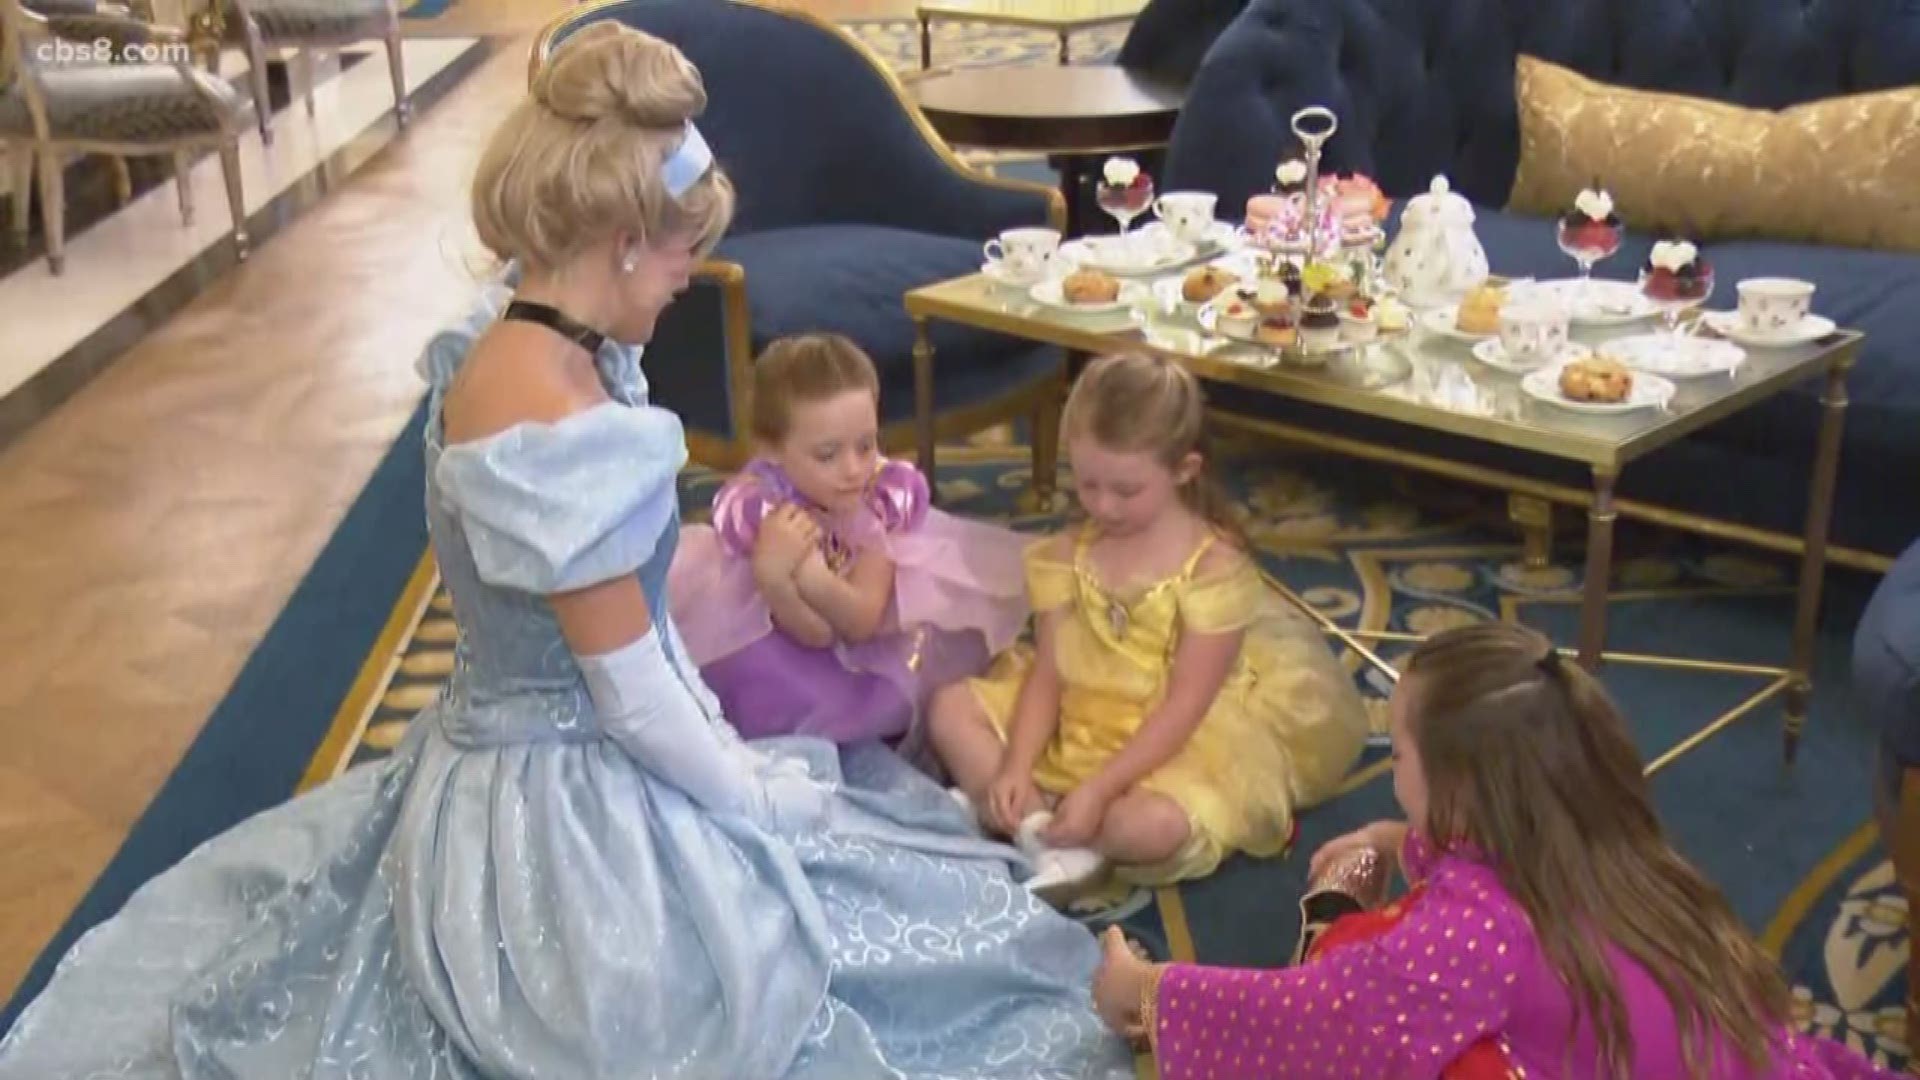 Attendees will be able to have tea time with Cinderella and some of her other princess friends.